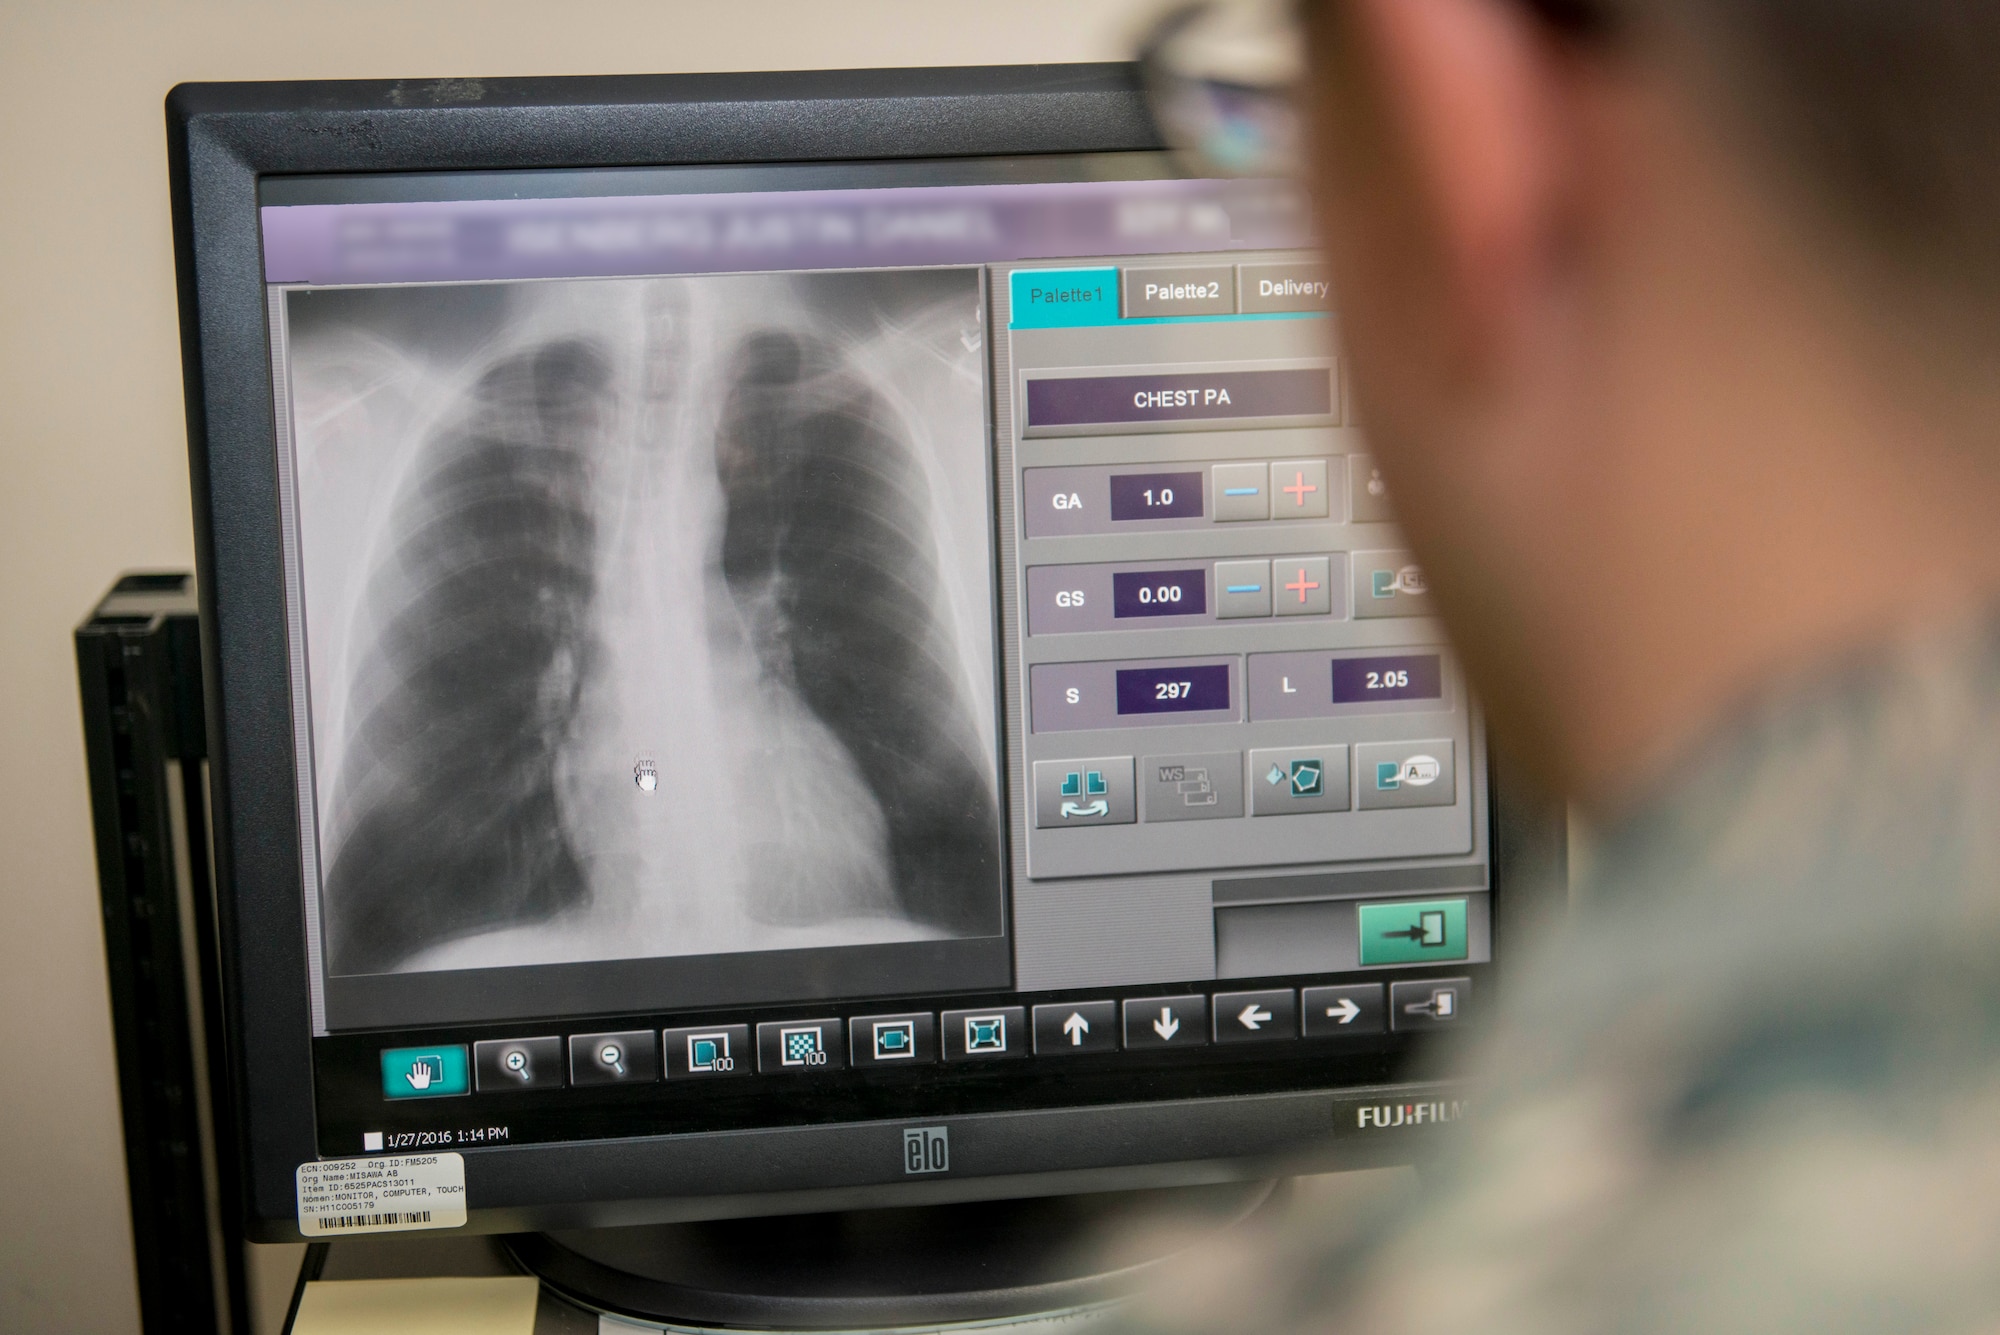 U.S. Air Force Airman 1st Class Jason Grosso, a diagnostic imaging technologist with the 35th Surgical Operations Squadron, conducts post-processing operations of a patient’s chest x-ray at Misawa Air Base, Japan, Jan. 27, 2016. Grosso adjusts tone and color parameters to get the right amount of grey so physicians can diagnose injuries. The brighter an area shows up, the more radiation is absorbed. This process ensures each image is easily interpretable by the physicians. Grosso hails from Bridgman, Michigan. (U.S. Air Force photo by Staff Sgt. Benjamin W. Stratton)